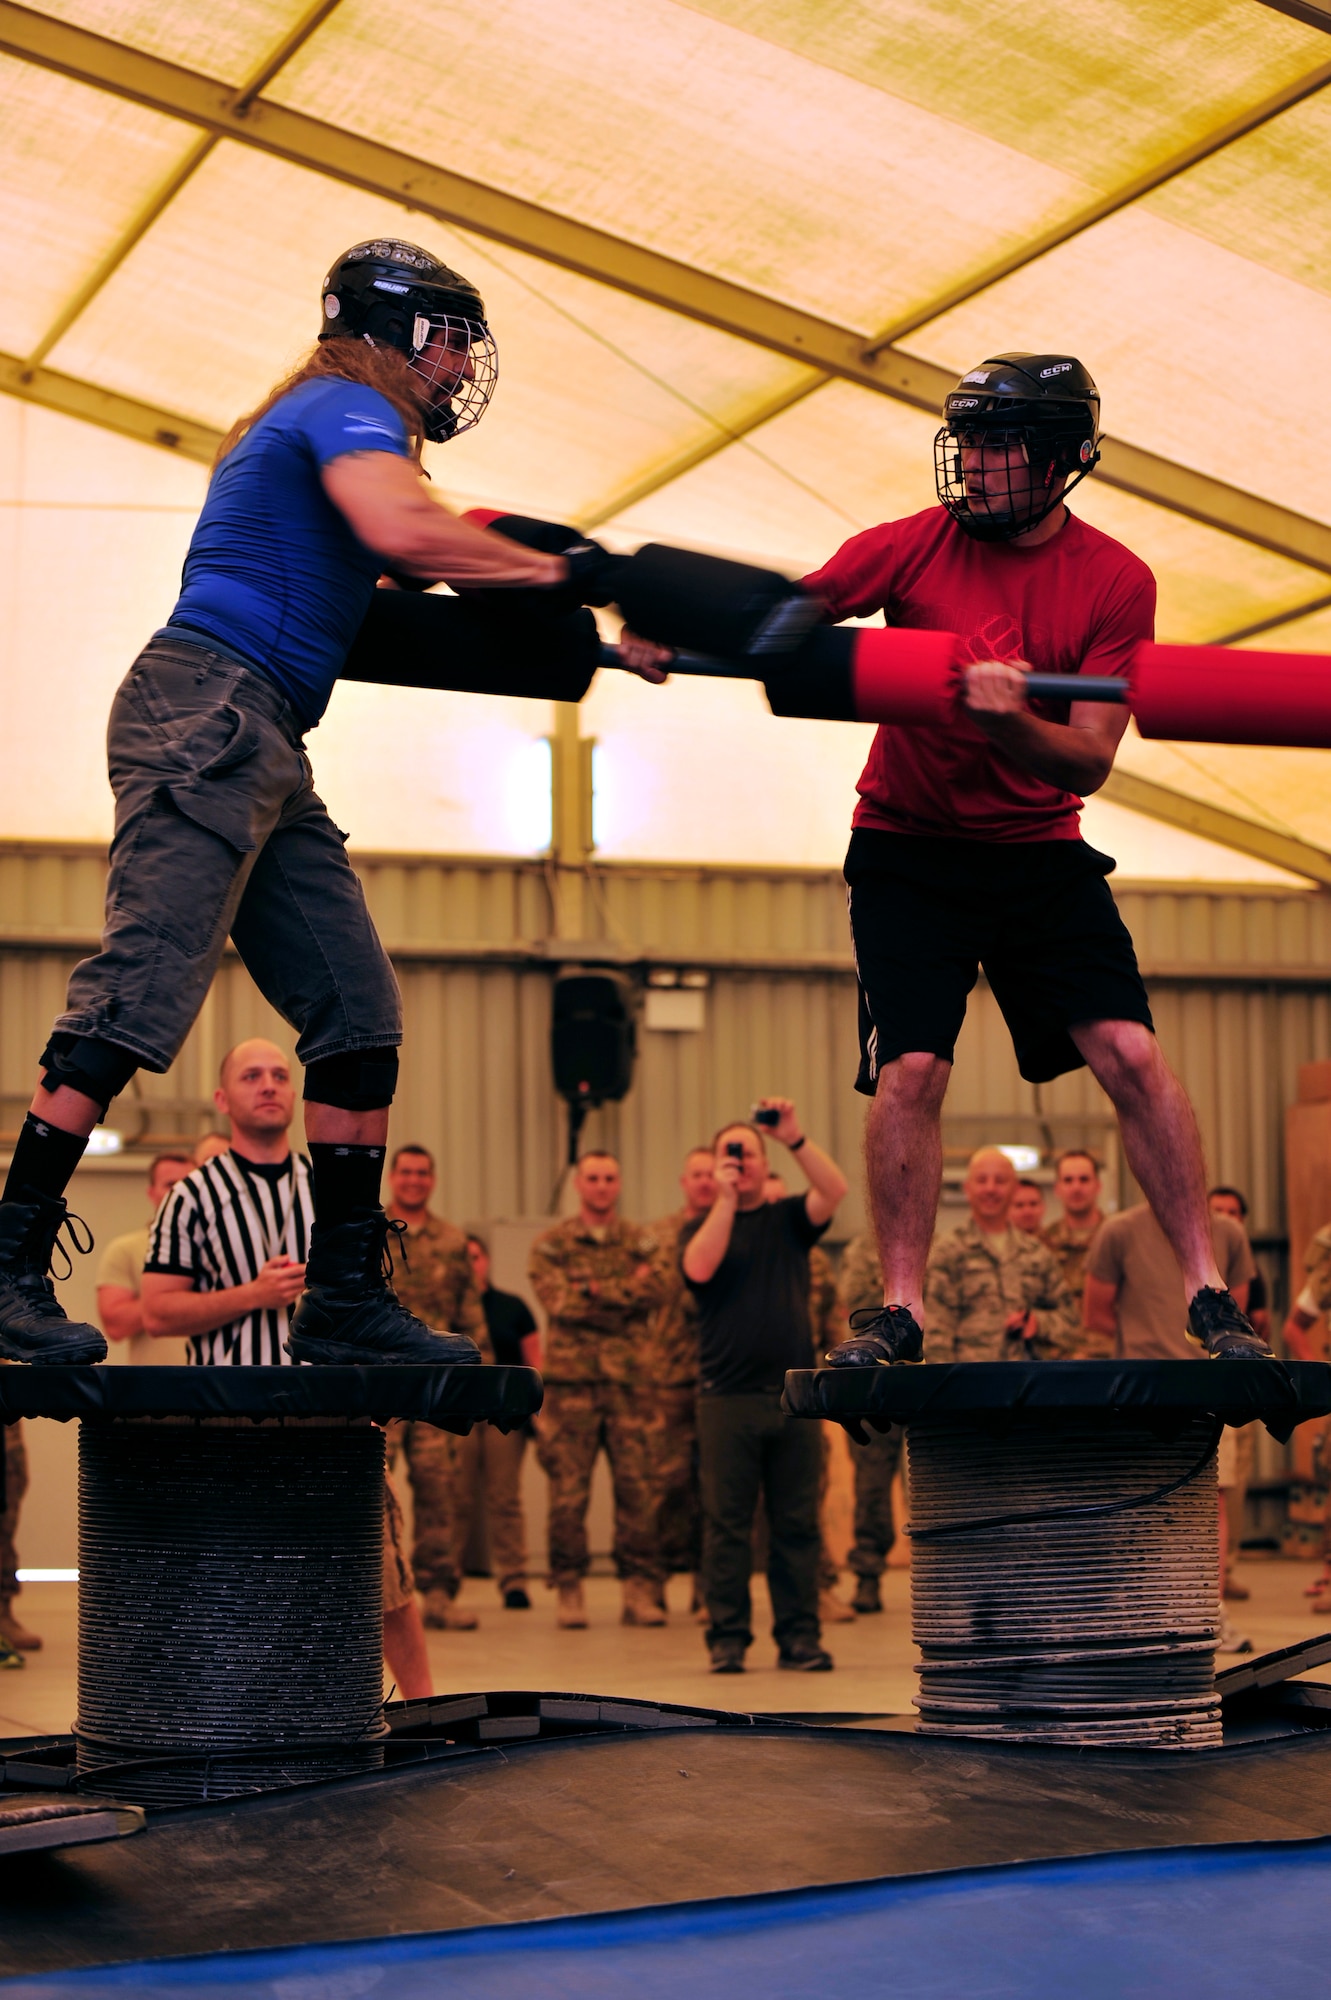 U.S. Air Force Senior Airman Desmond Longnecker, 380th Expeditionary Aircraft Maintenance Squadron crew chief, deployed from Kadena Air Base, Japan, competes against American Gladiator, Hollywood "Wolf" Yates, during the Joust competition at an undisclosed location in Southwest Asia April 6, 2013. The Gladiators and Billy Blanks visited several bases in Southwest Asia during an Armed Forces Entertainment Fitness Tour. (U.S. Air Force photo by Tech. Sgt. Christina M. Styer/Released) 